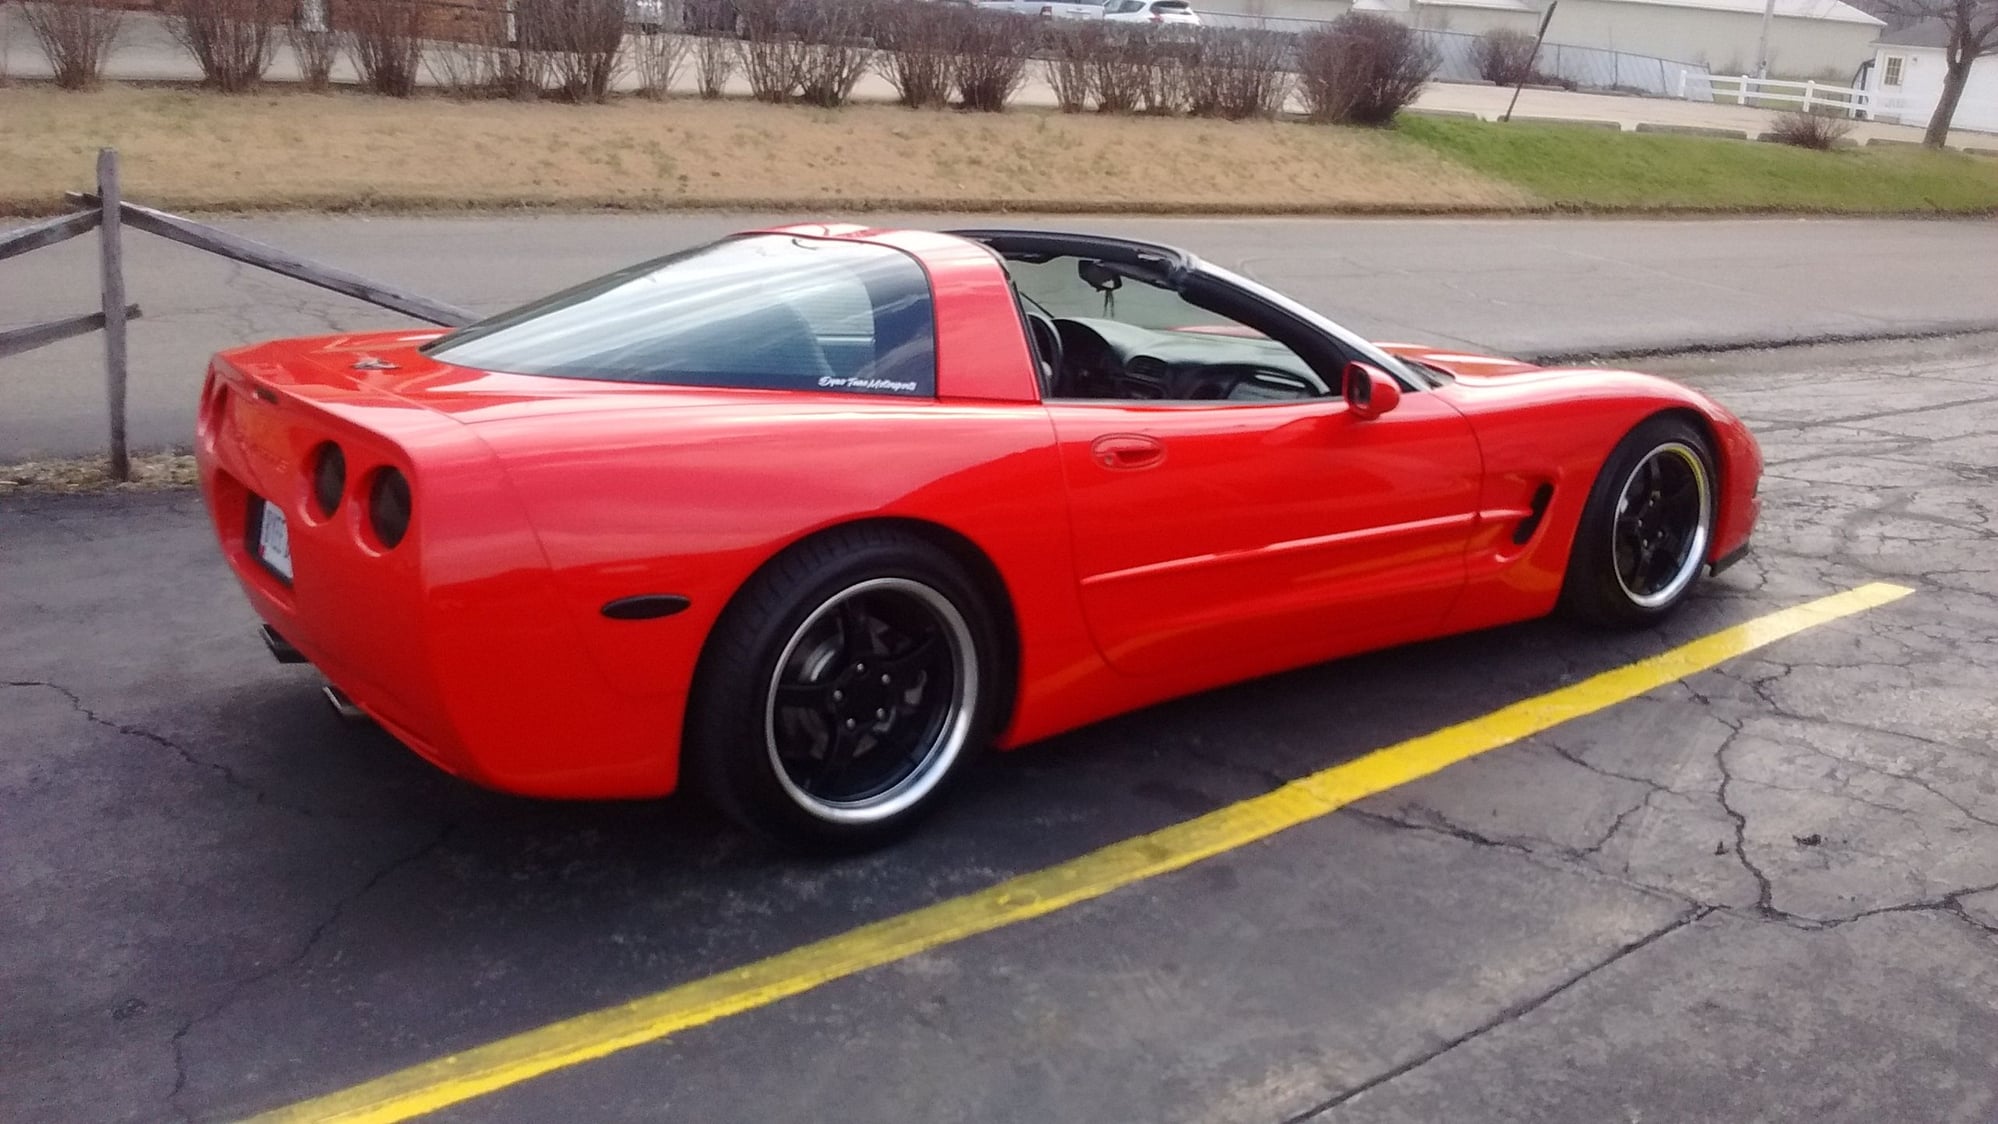 Ohio! Want to trade brand new rims and tires for c6 wheels or chrome